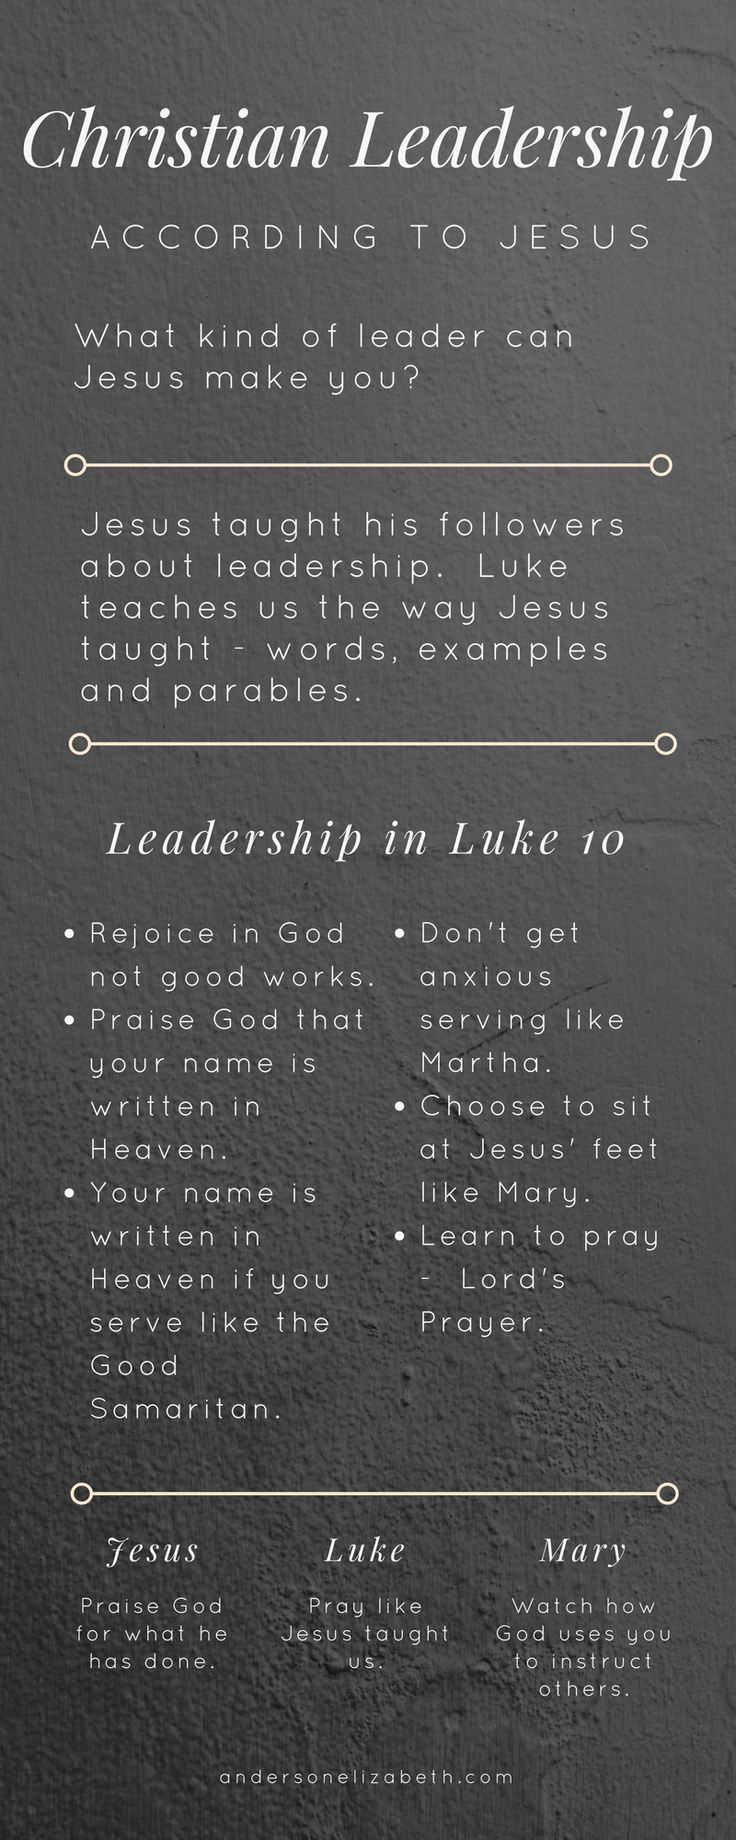 lead a godly example scripture